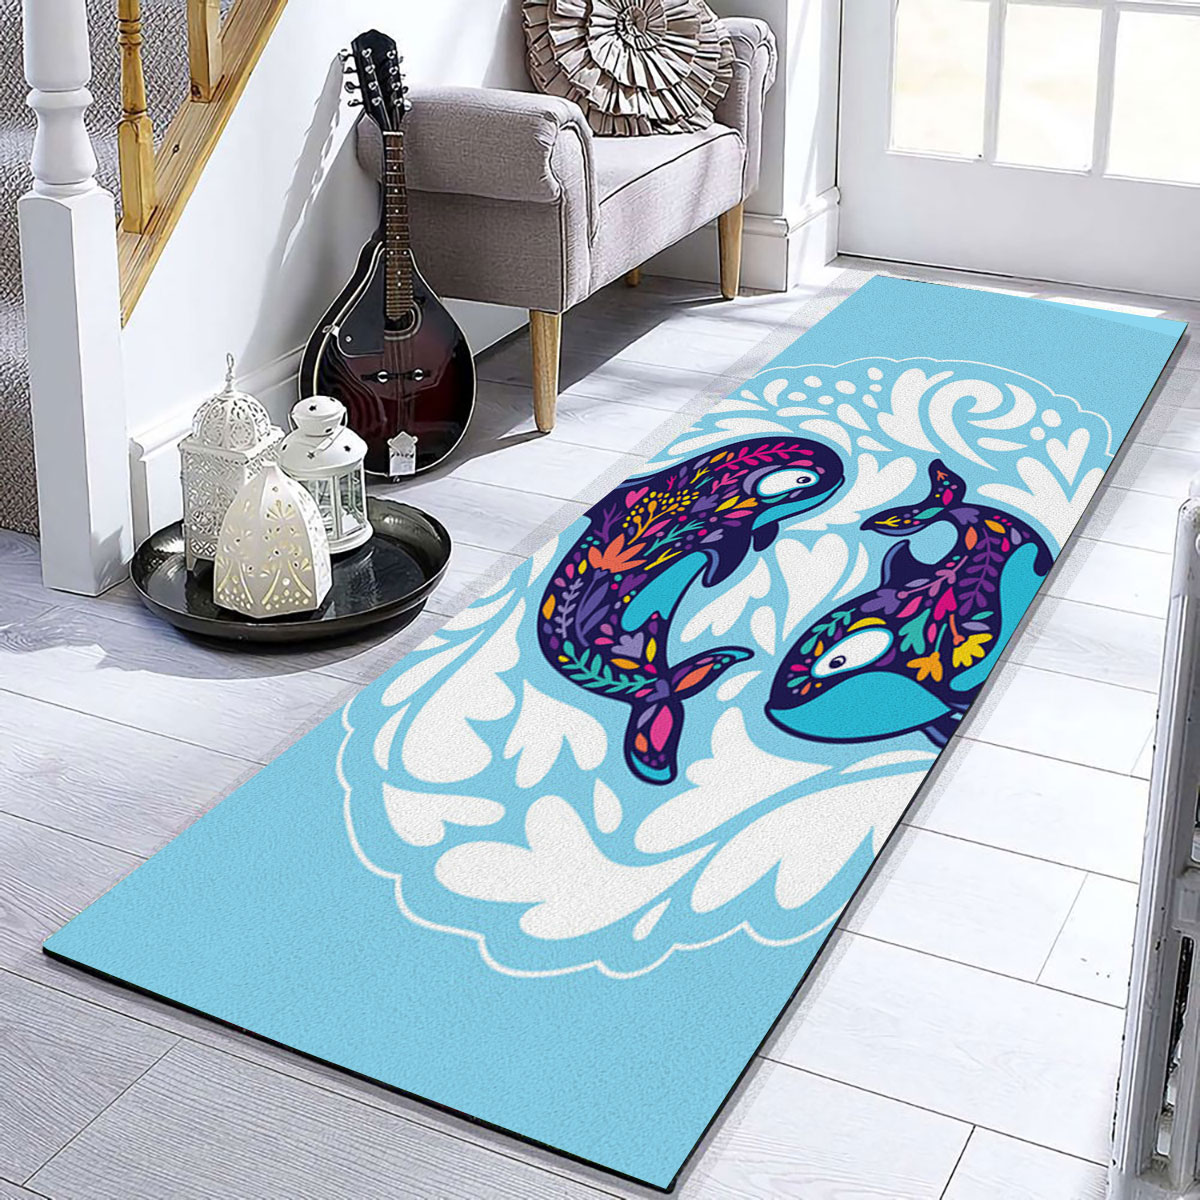 Double Floral Orca Runner Carpet